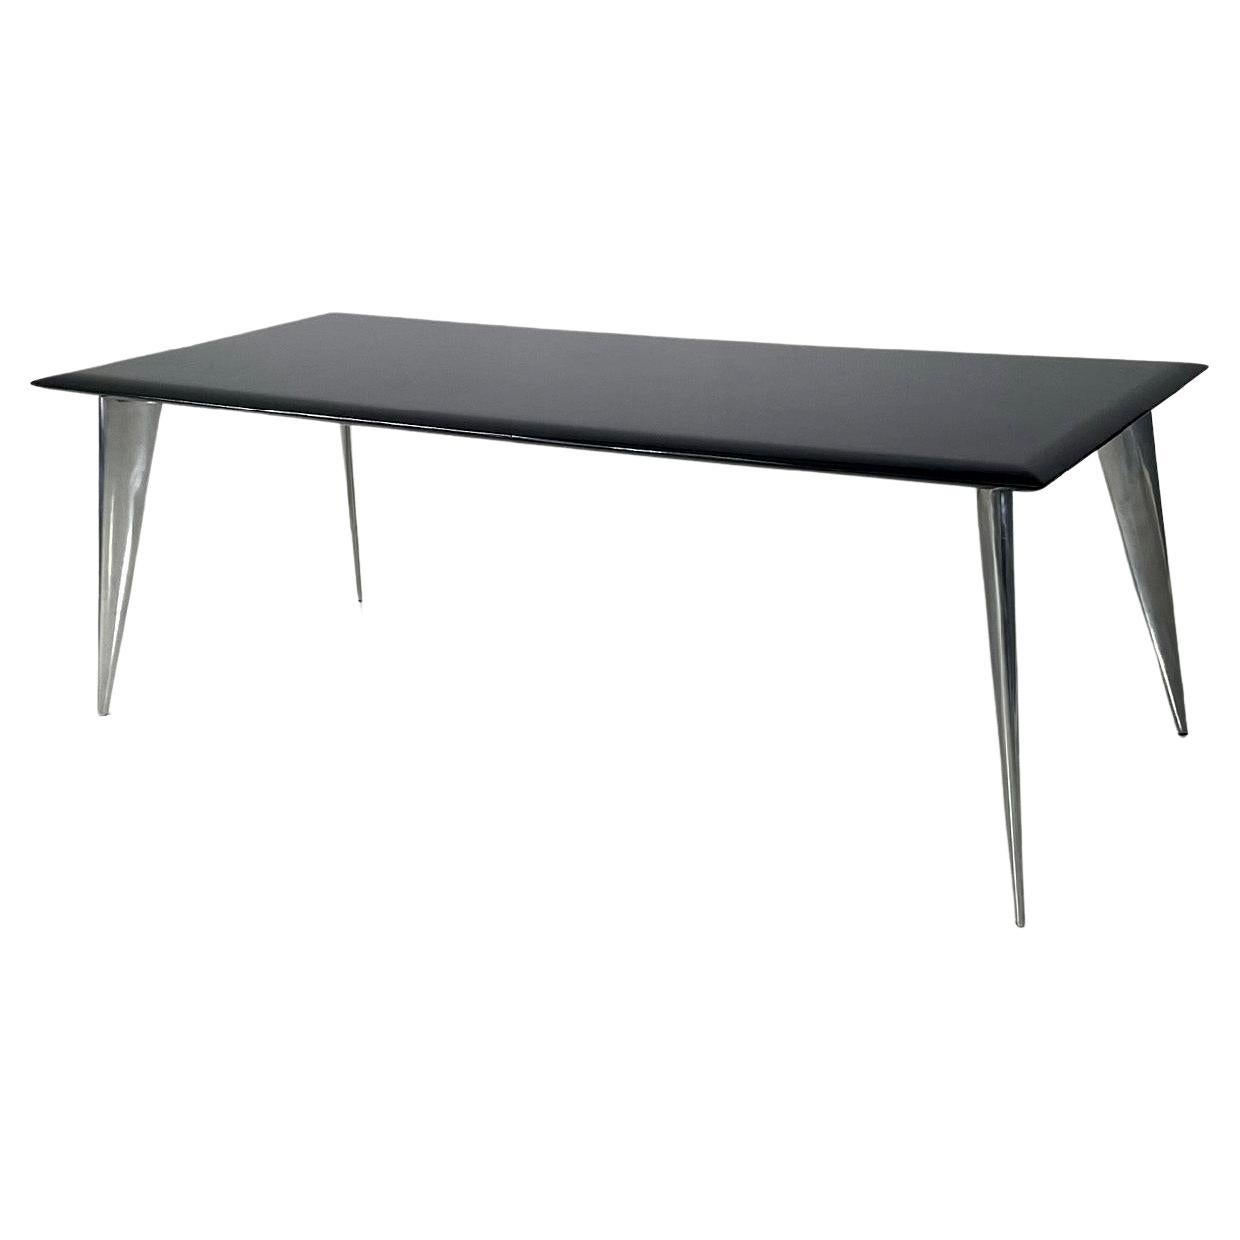 Italian modern black dining table M by Philippe Starck for Driade Aleph, 1980s For Sale